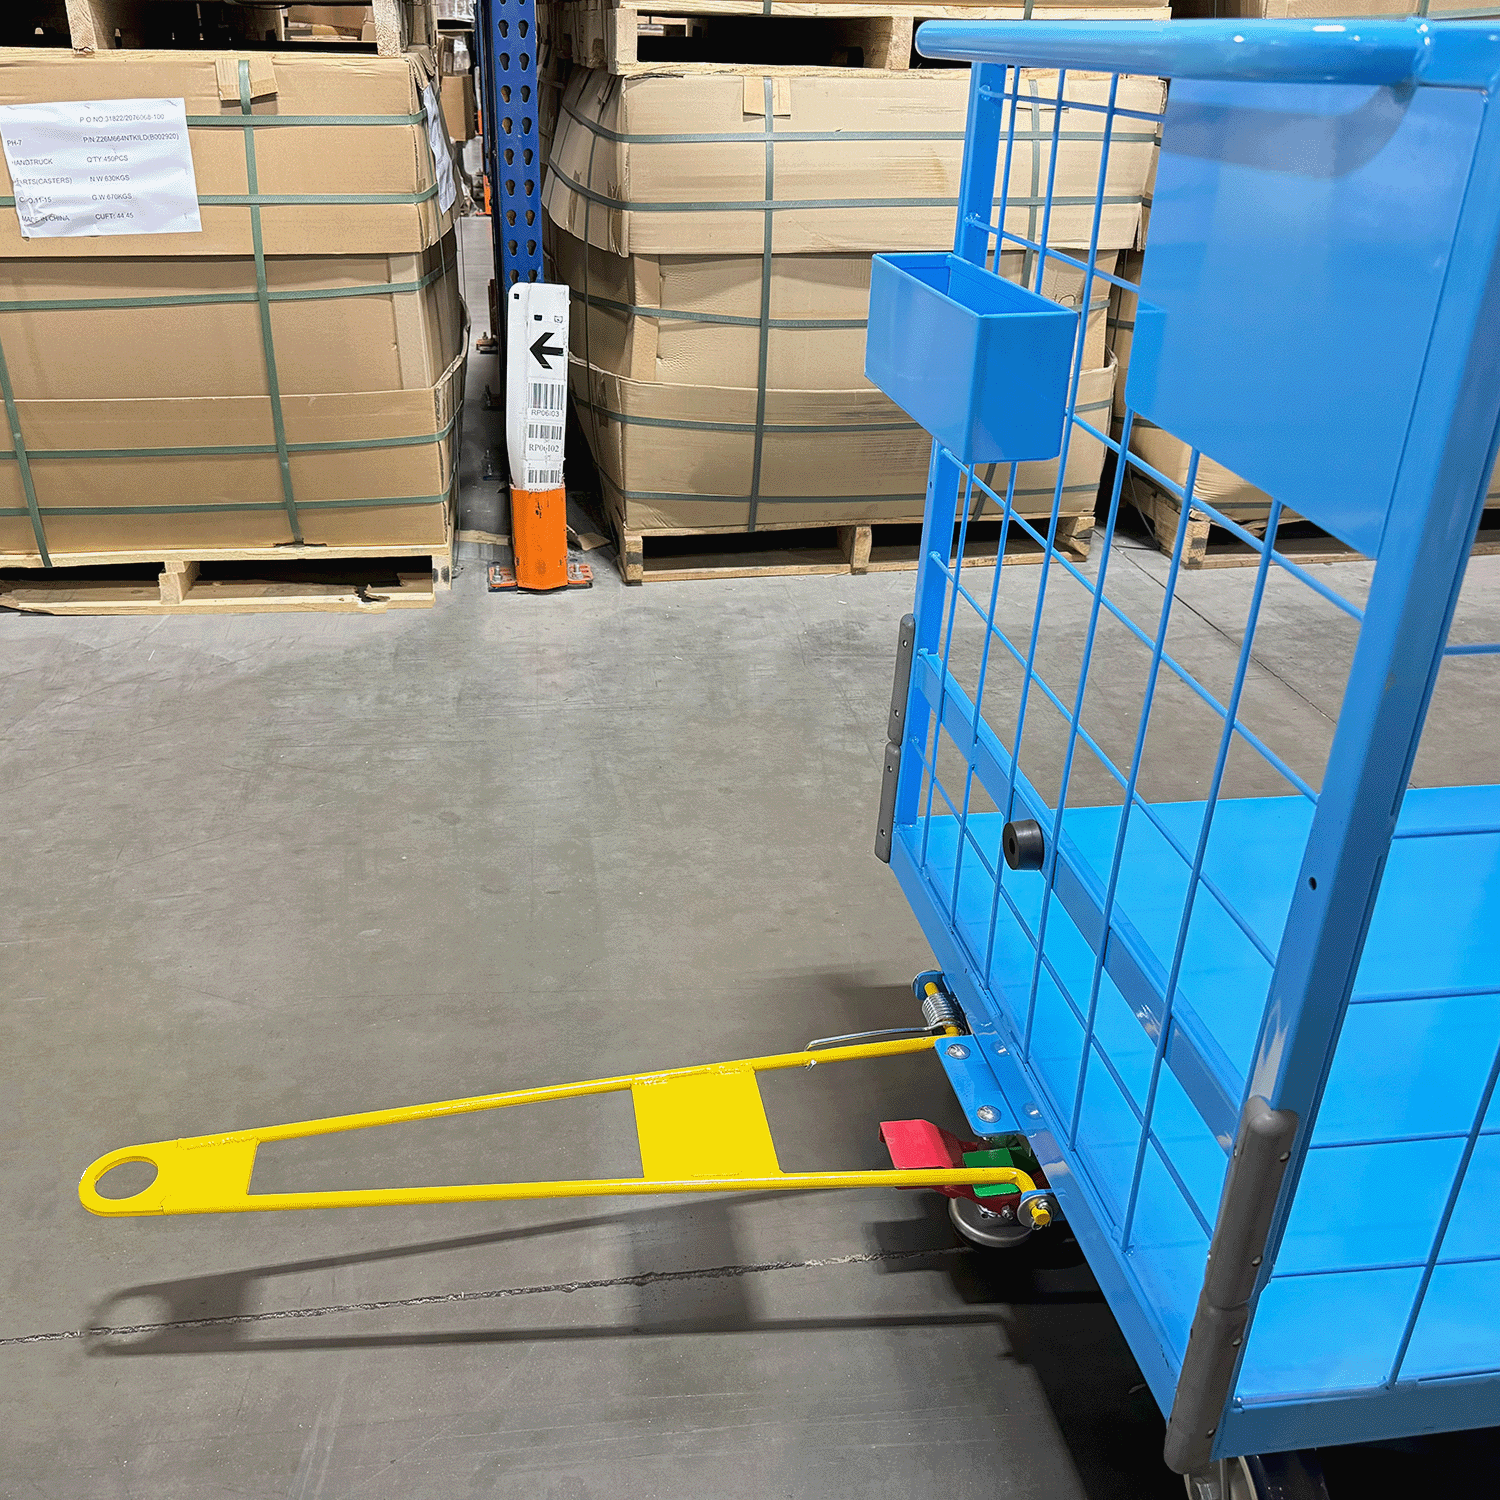 Spring-Loaded Tow Bar: The spring-loaded tow bar is a crucial feature that enhances the cart's maneuverability and ease of use. It allows the cart to be easily attached to a tugger or tow vehicle for transportation within the warehouse or distribution center. The spring-loaded mechanism ensures smooth coupling and decoupling, reducing strain on the operator and minimizing the risk of accidents.